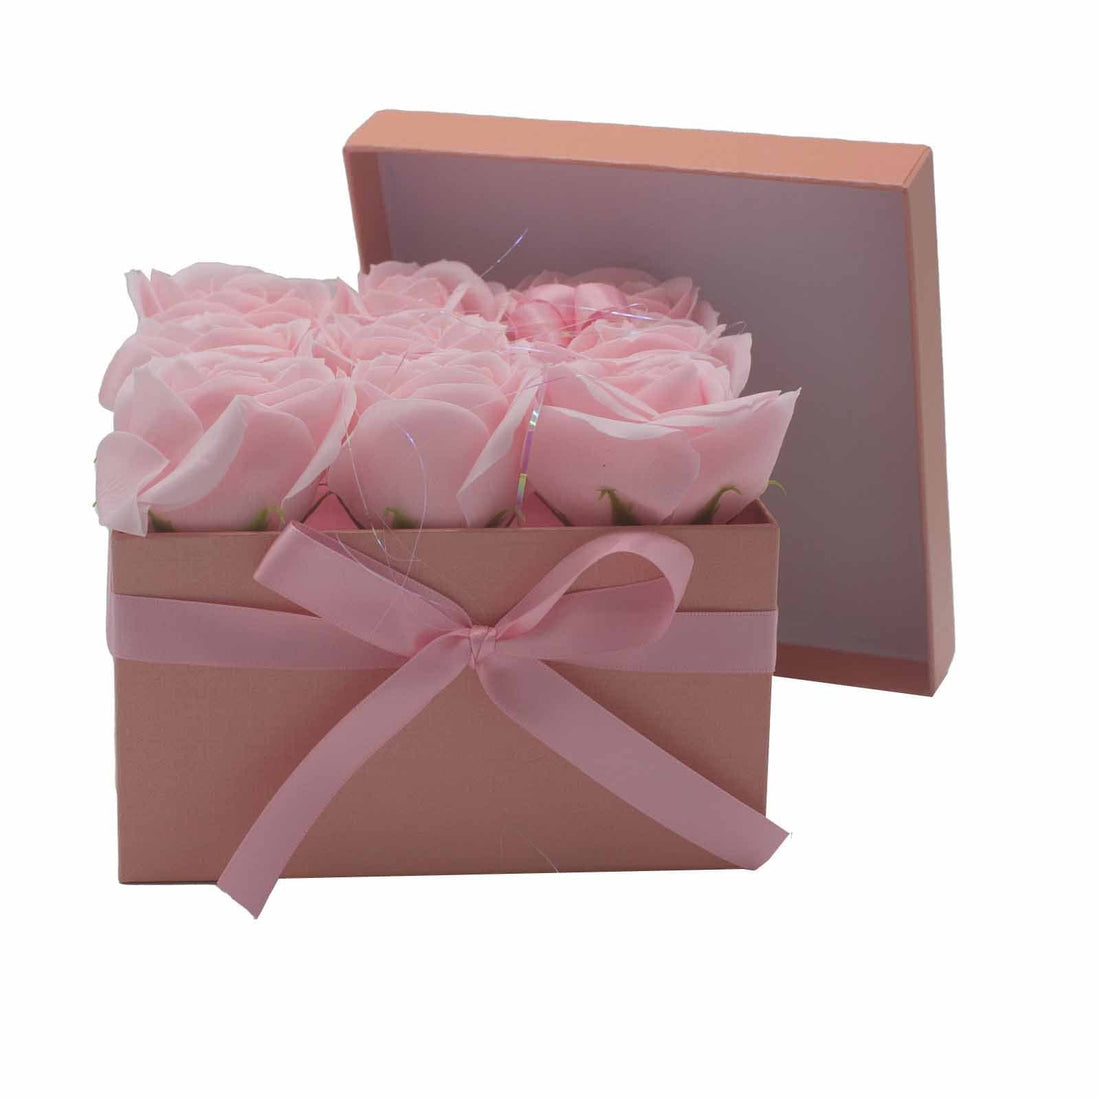 Soap Flower Gift Bouquet - 9 Pink Roses - Square - best price from Maltashopper.com GSFB-04